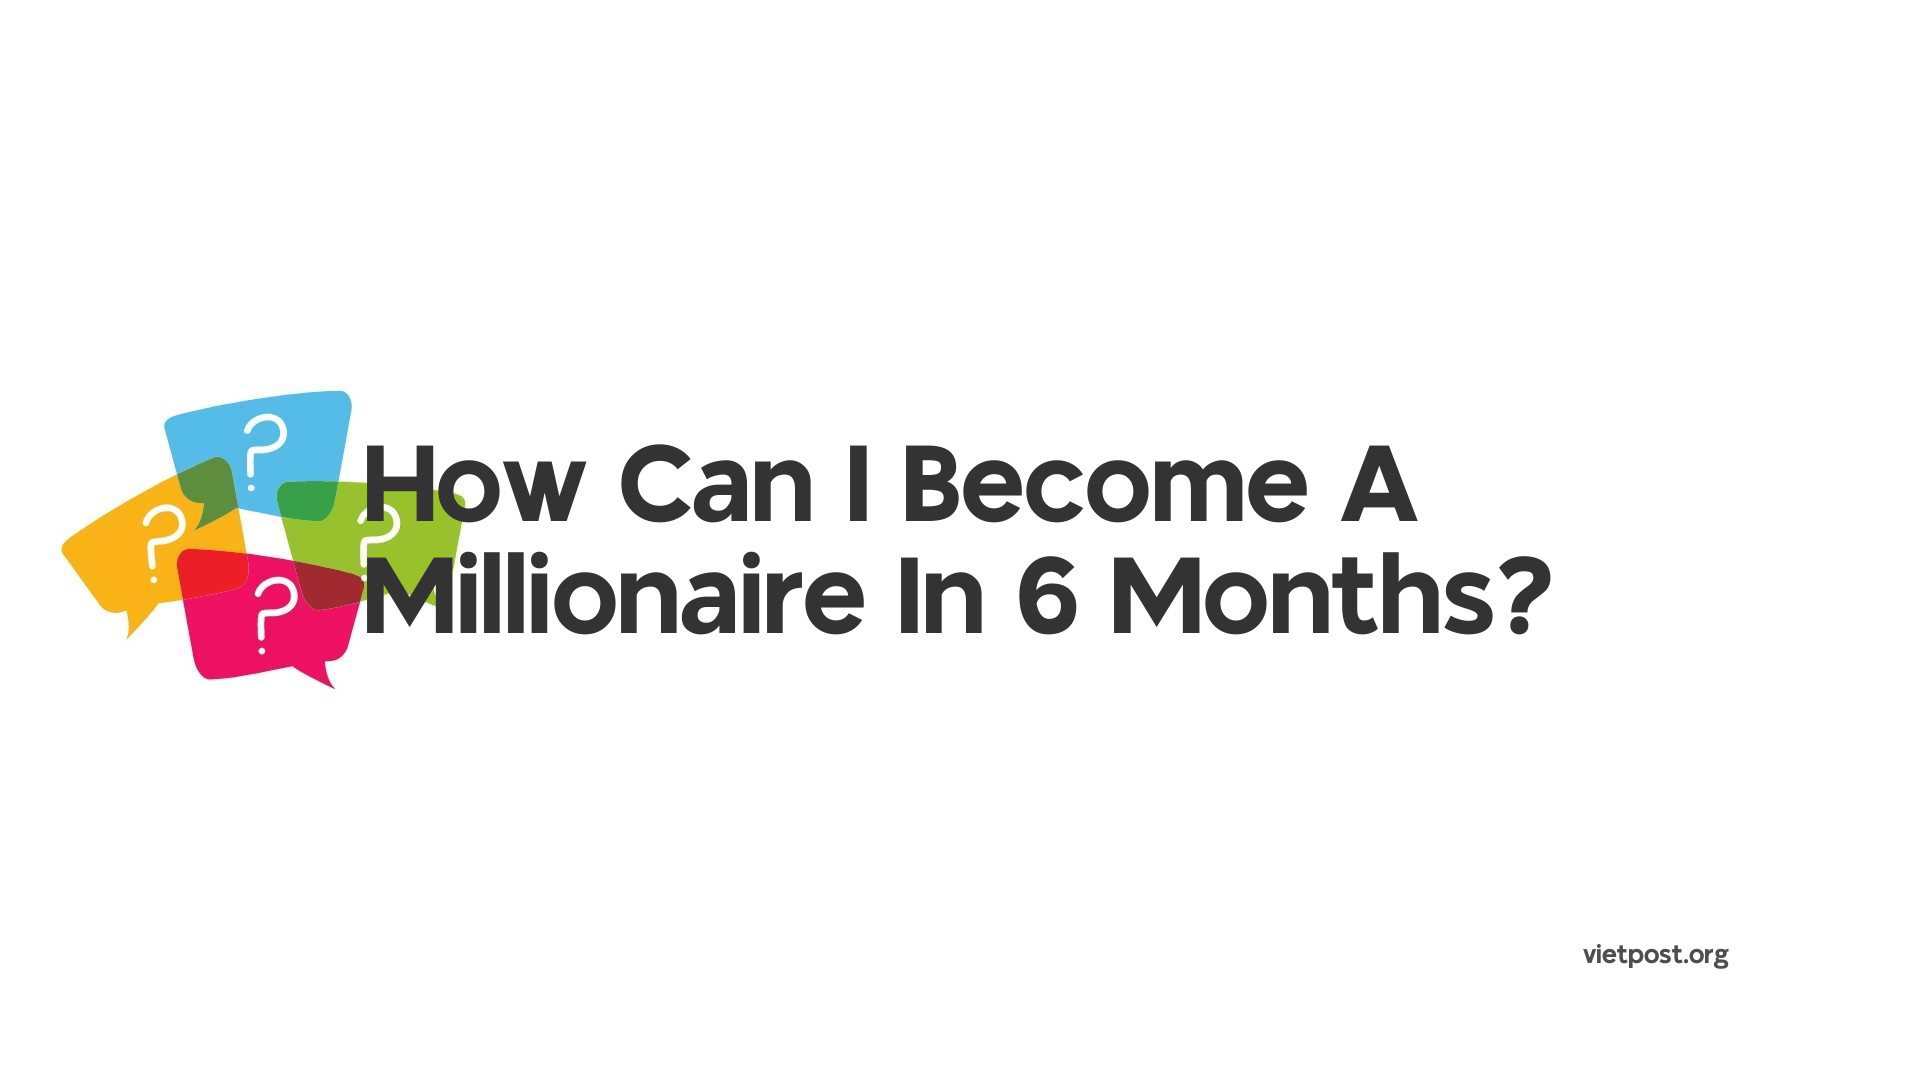 How Can I Become A Millionaire In 6 Months?